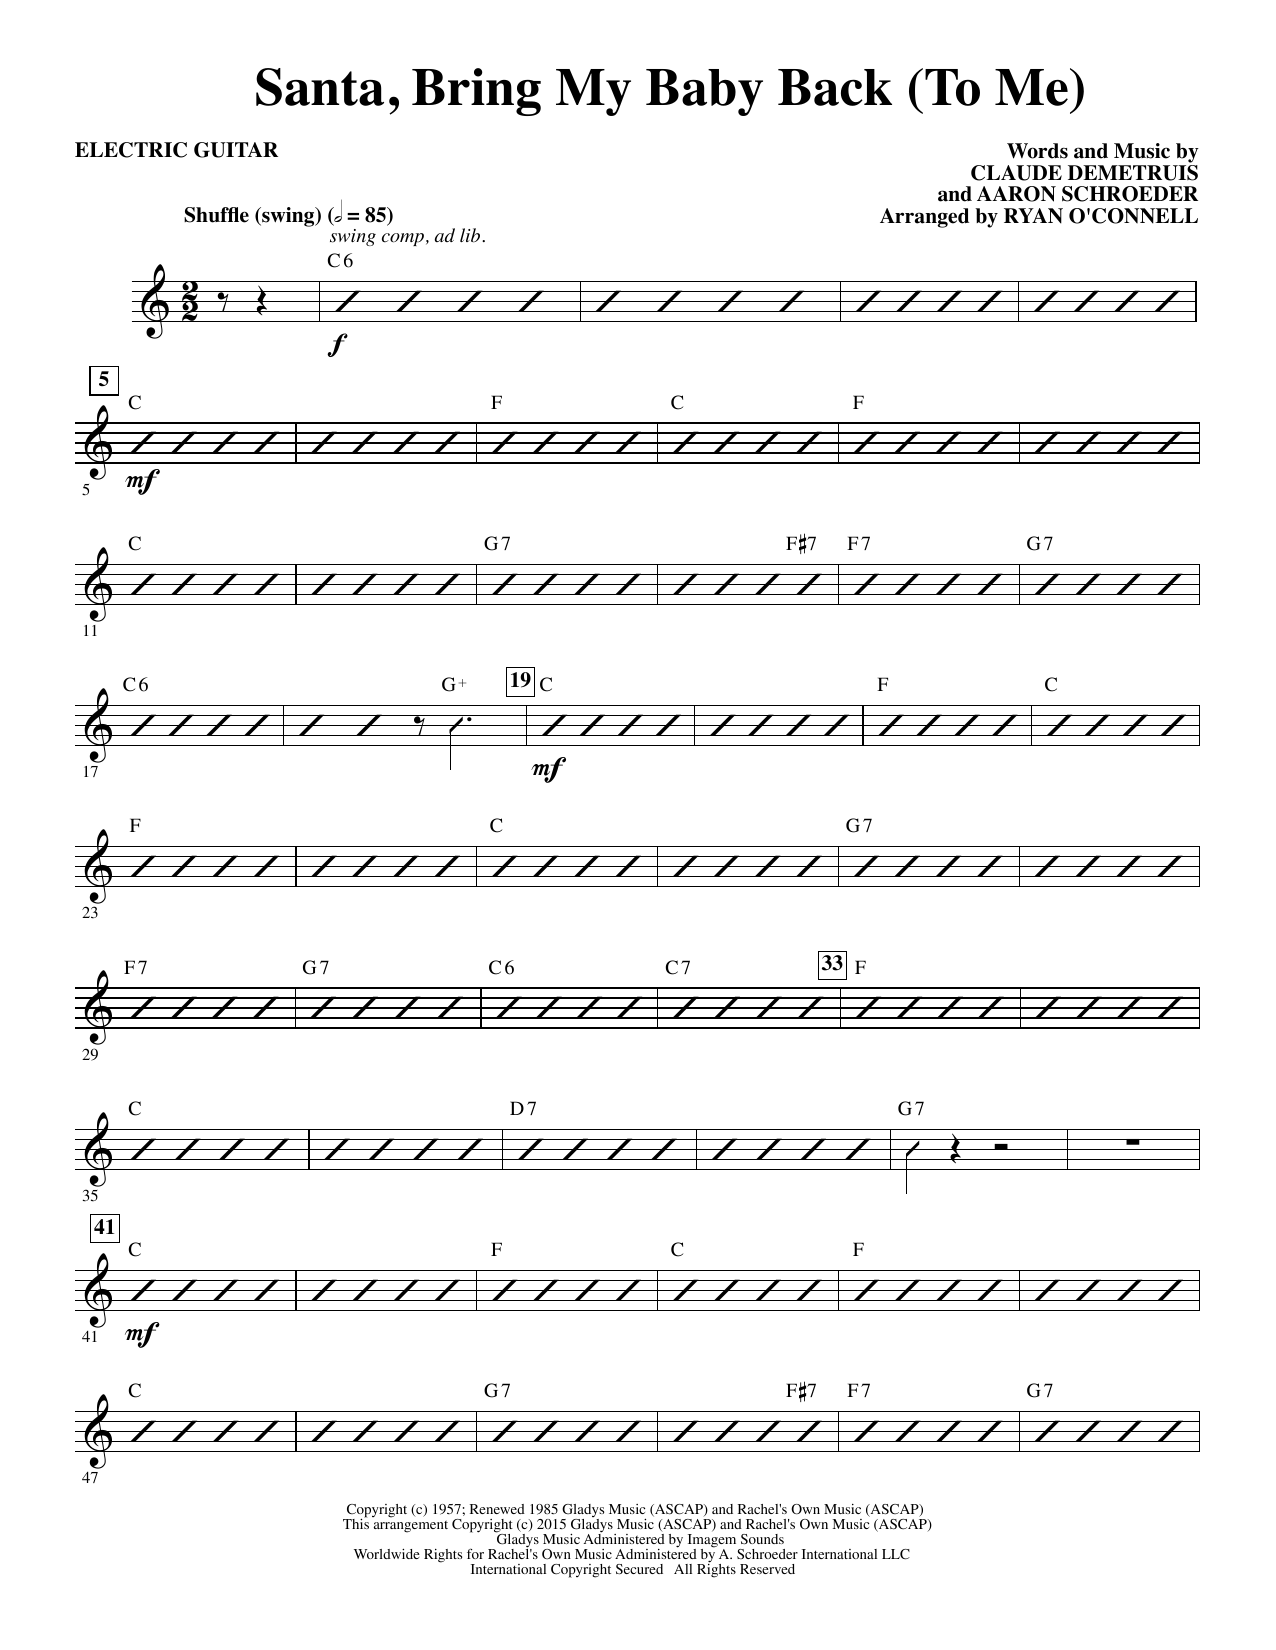 Ryan O'Connell Santa, Bring My Baby Back (To Me) - Guitar sheet music notes and chords. Download Printable PDF.